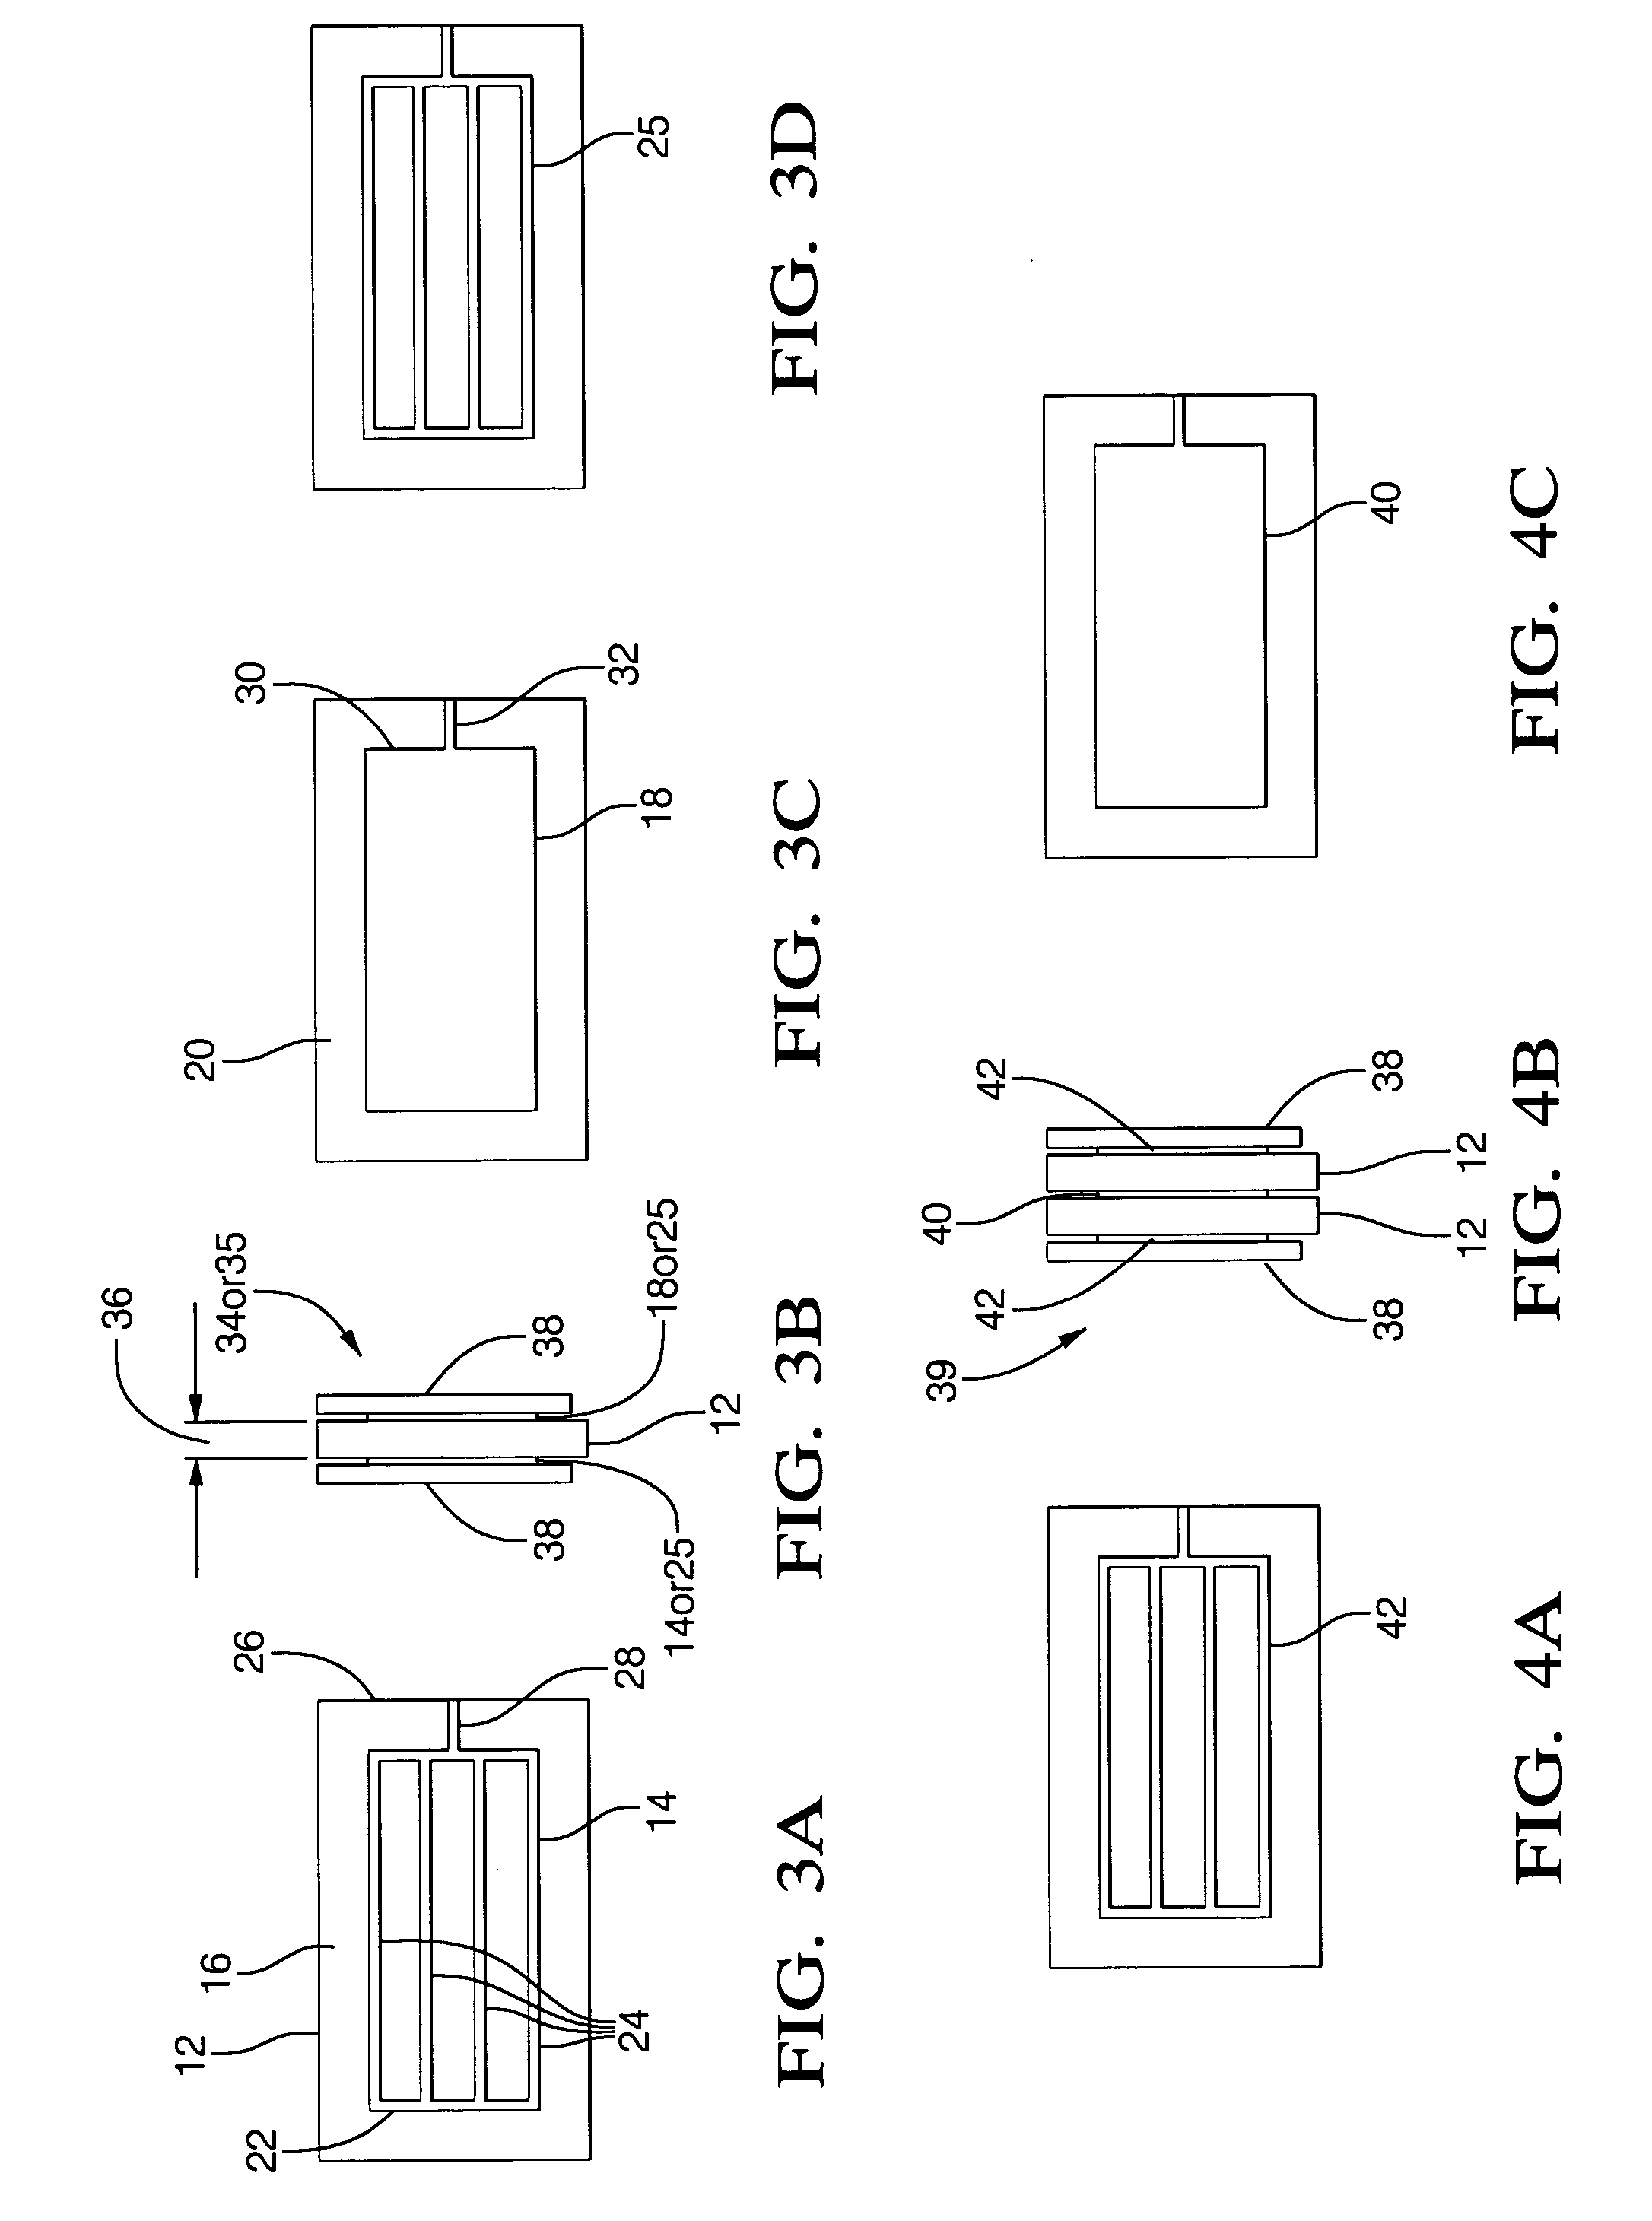 Surface discharge non-thermal plasma reactor and method